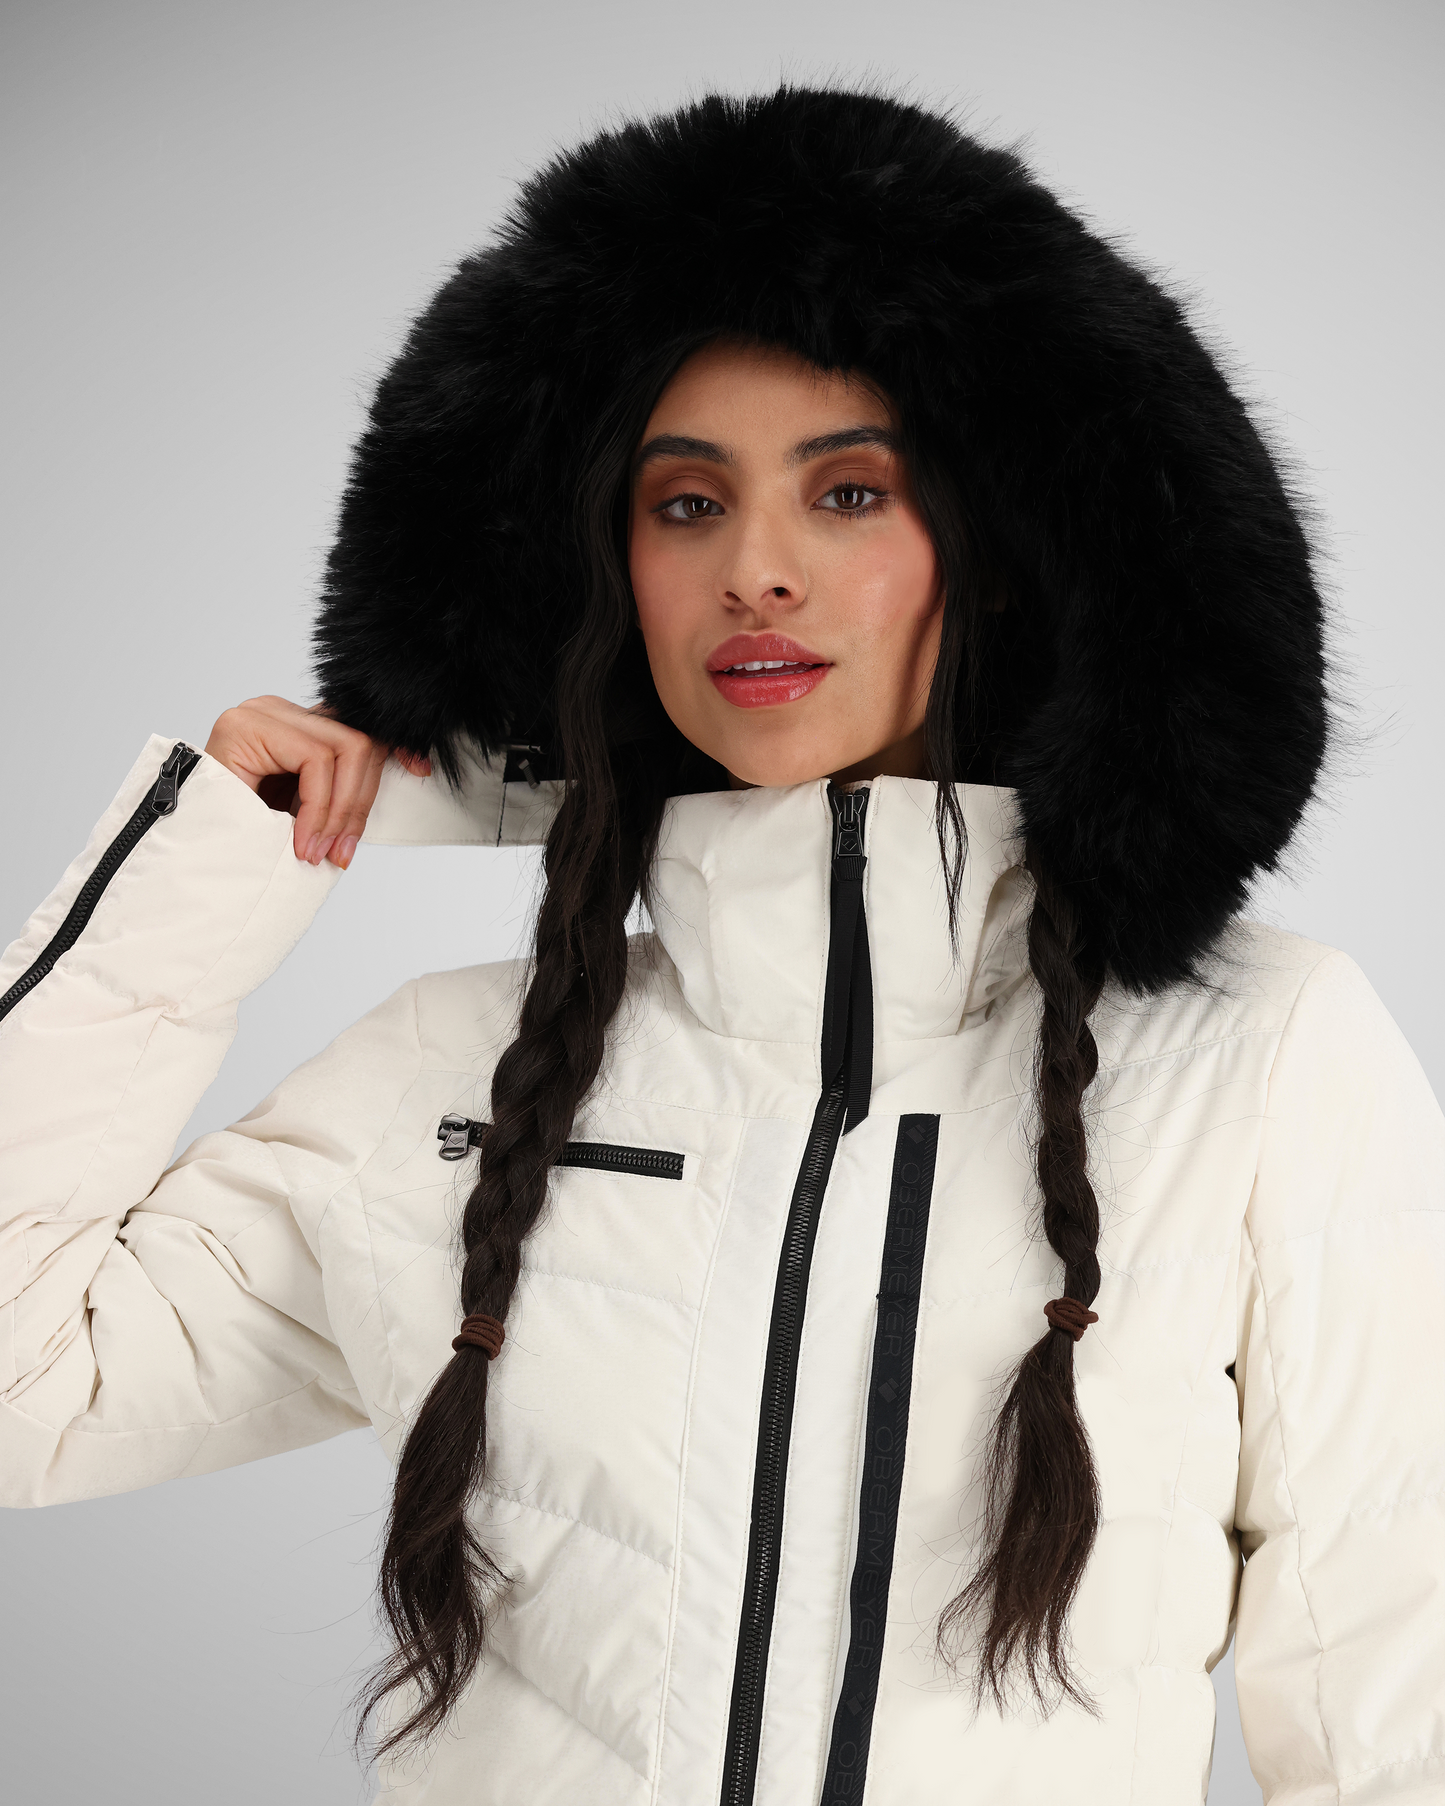 2-way adjustable, removable hood | Situations change on a dime out there on the trail. Customize your style and comfort level in seconds to fit your needs. The Circe also features a faux fur trim.